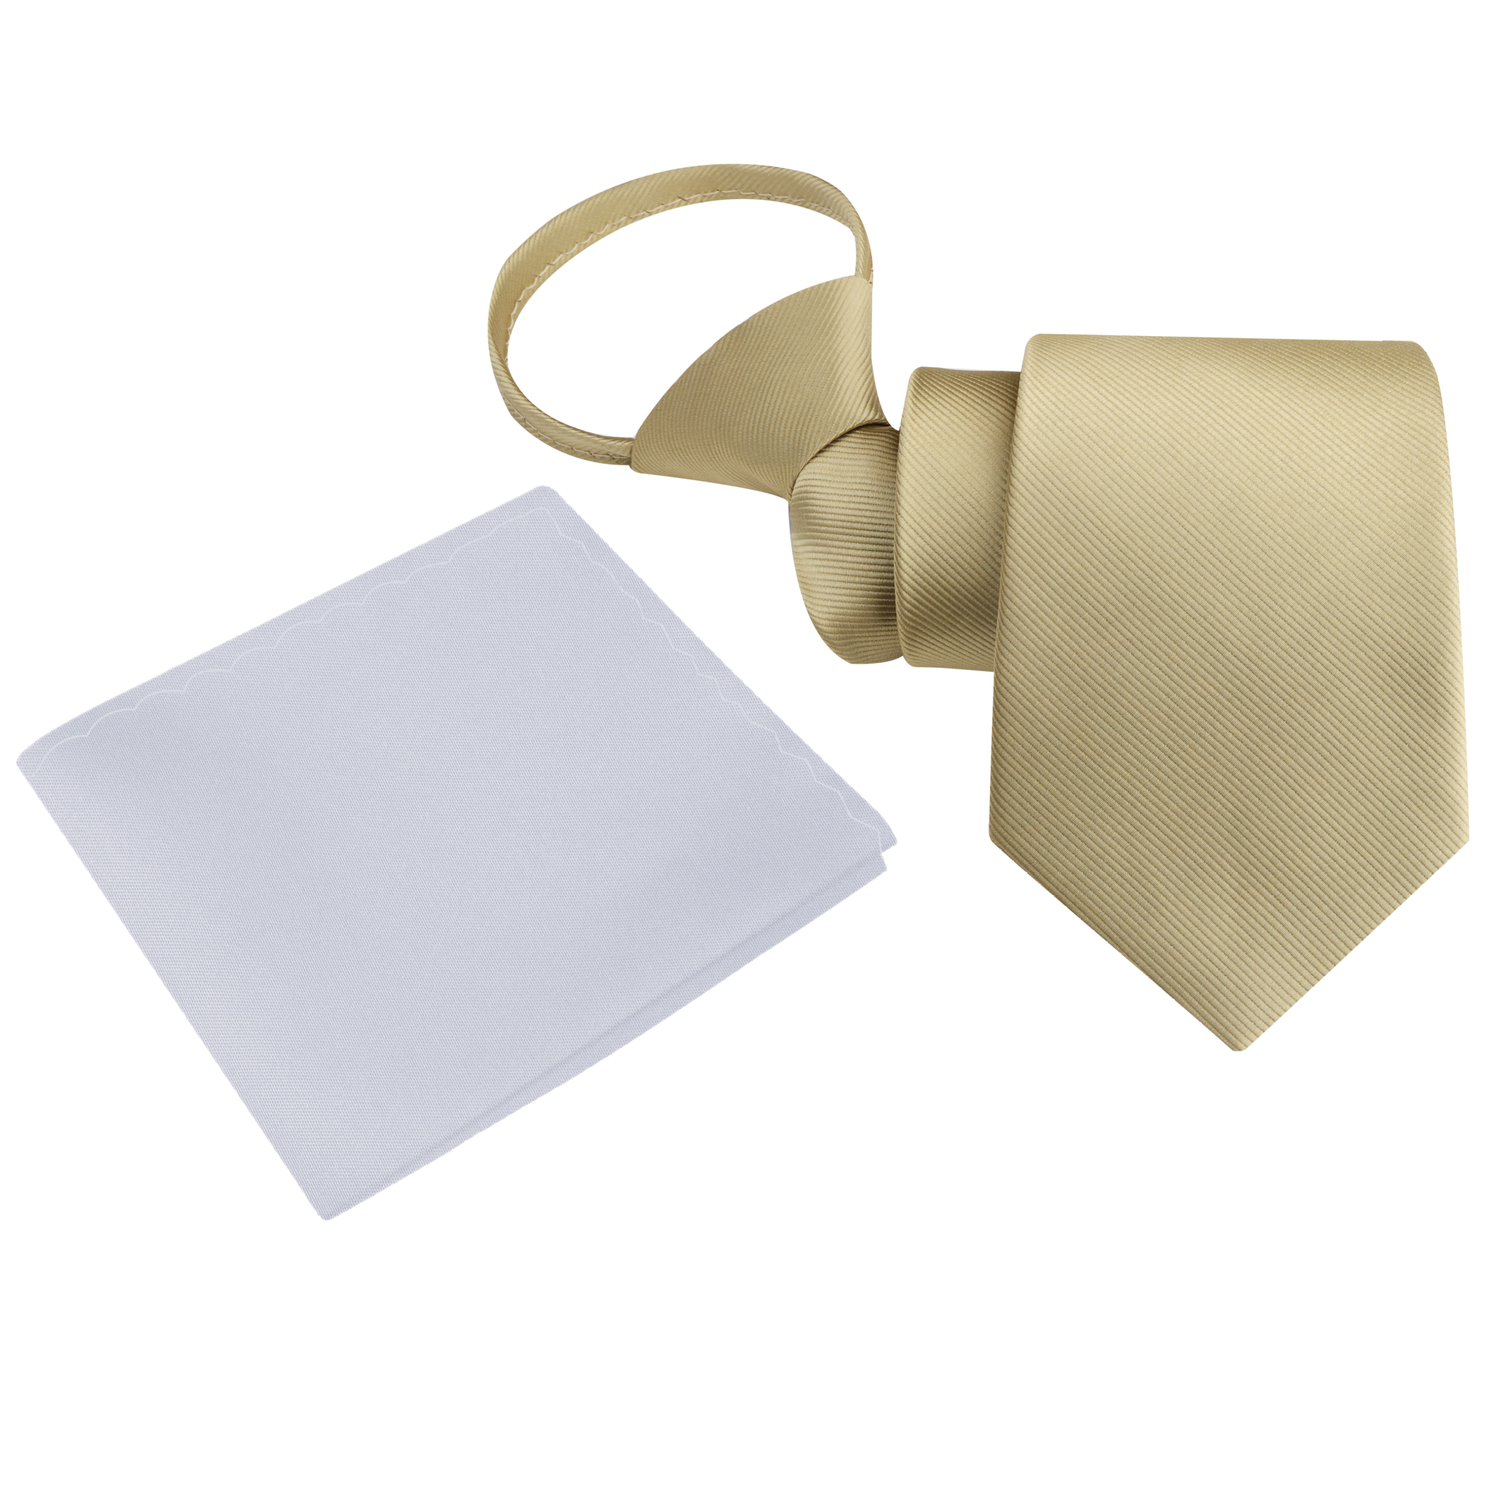 Zipper: Solid Pale Gold Tie and Light Grey Square